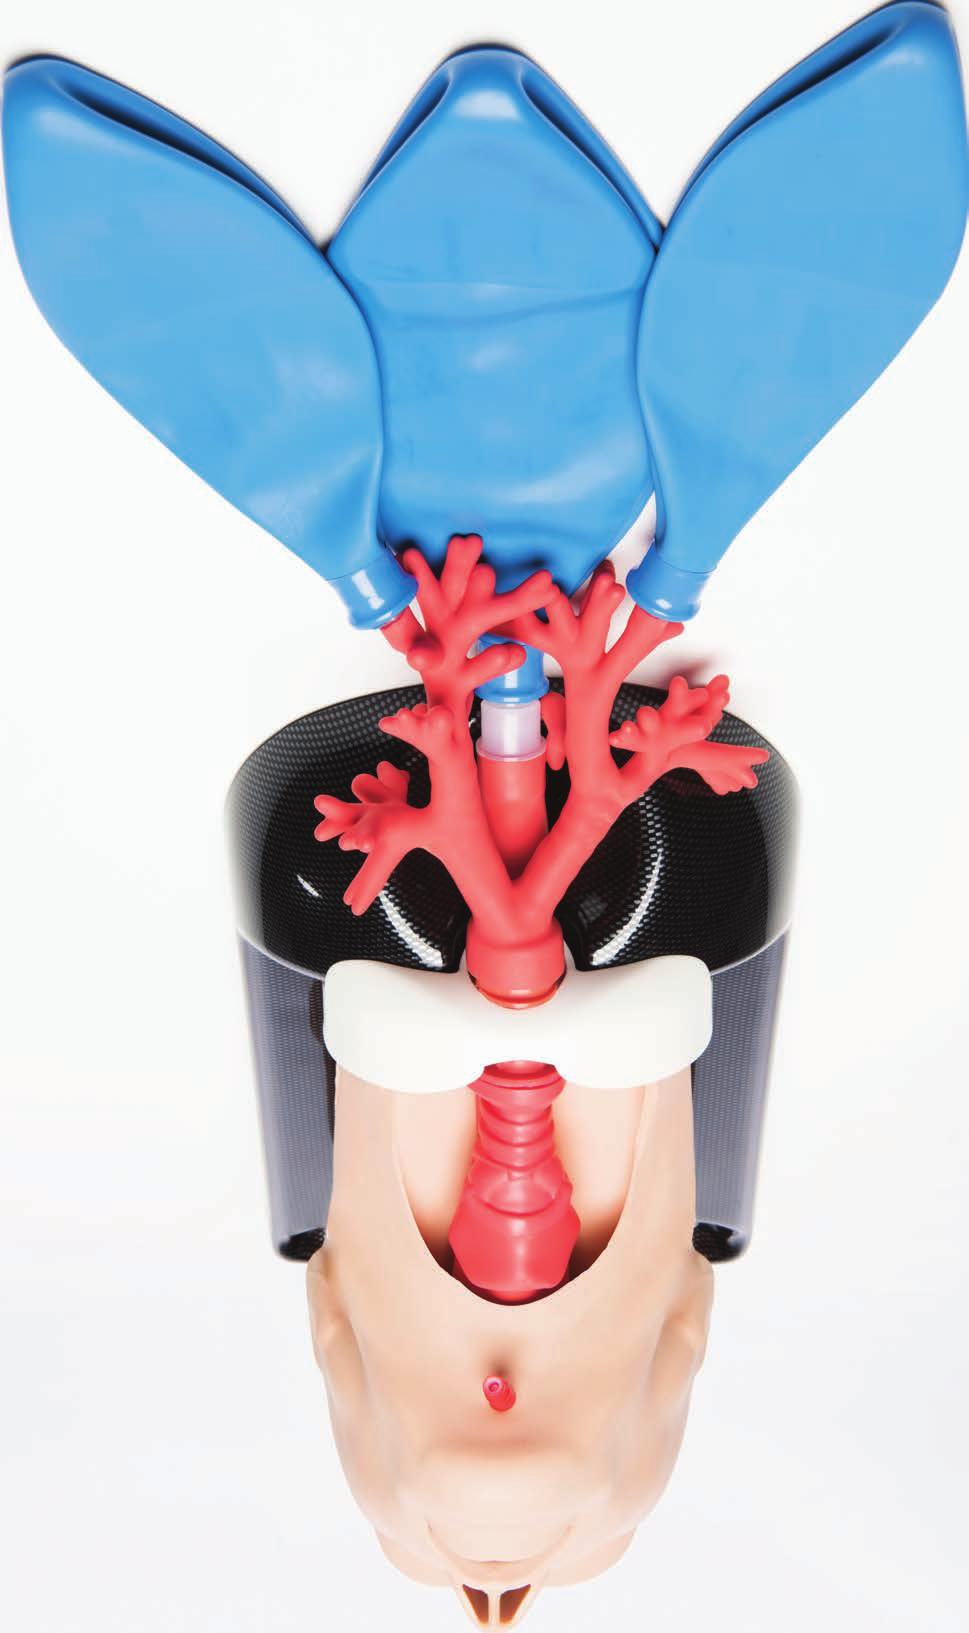 AIRSIM COMBO X The AirSim Combo X features the AirSim X Airway, nasal passage, an anatomically accurate simulated cricoid, laryngeal cartilages and palpable tracheal rings.